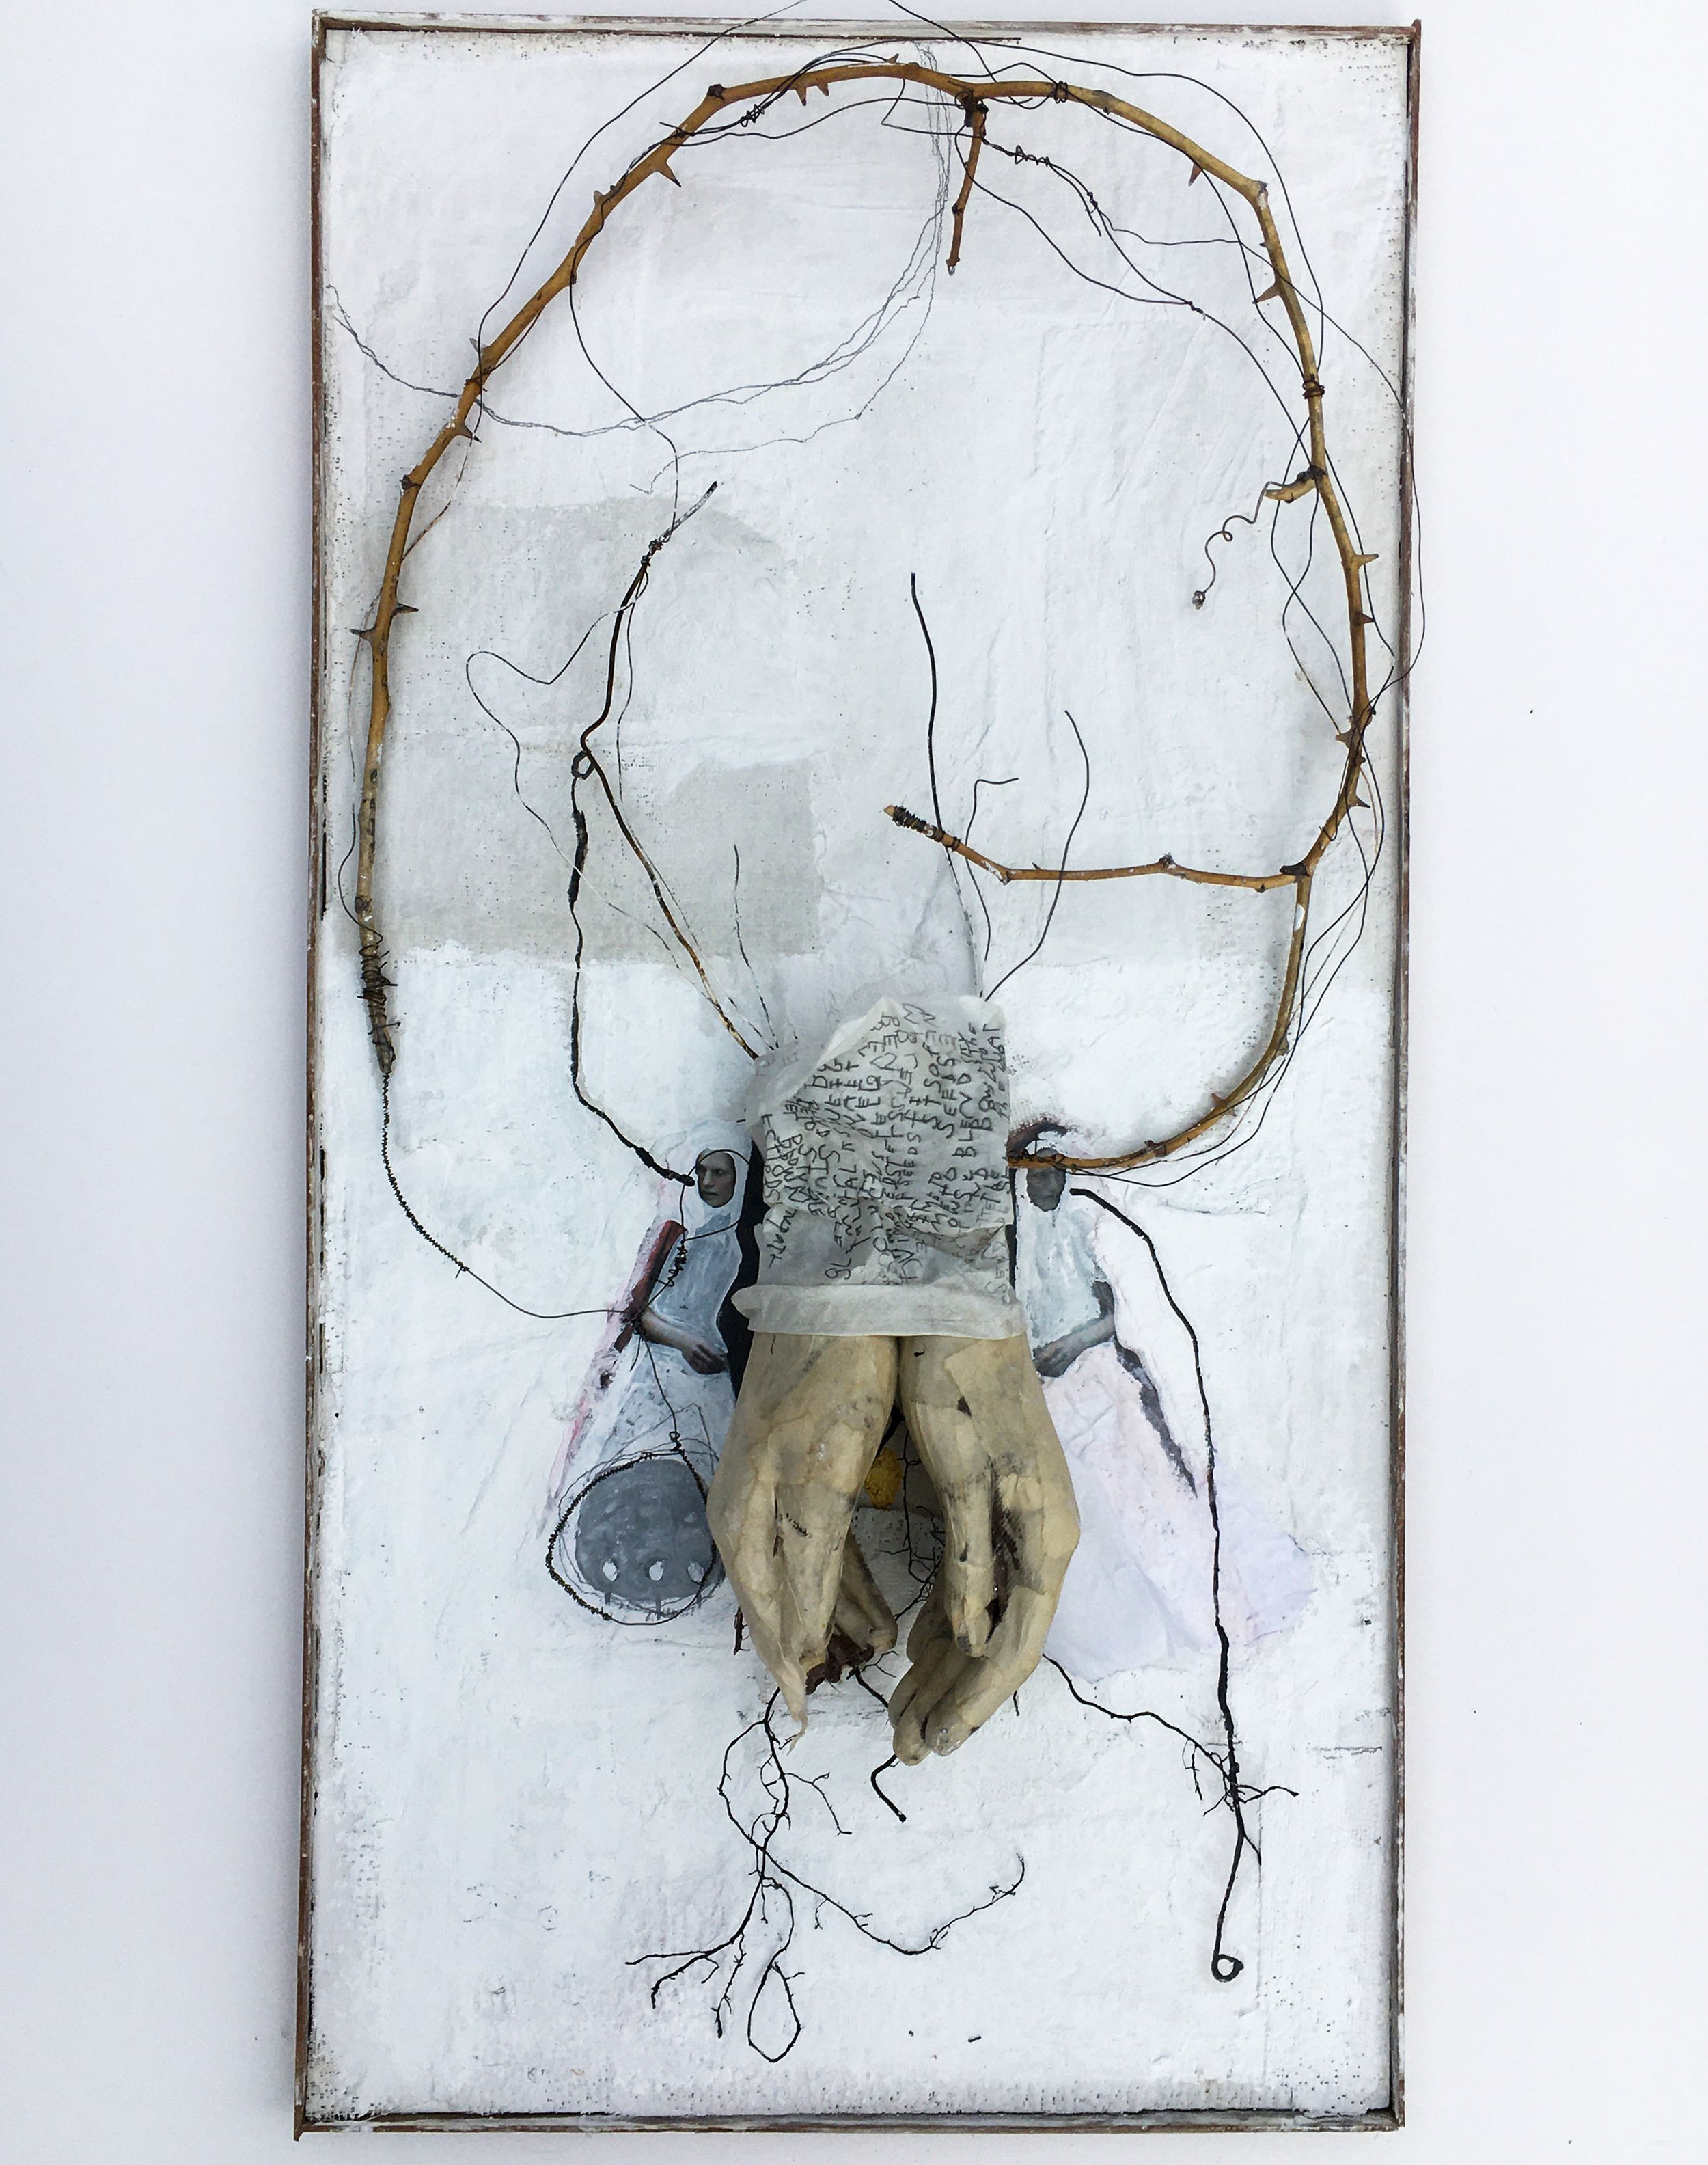 DEVOTION, 2021. Plaster, wax, paper, rose cane, plant roots, wire, 26.5 x 13.5 x 5”. Private collection. 